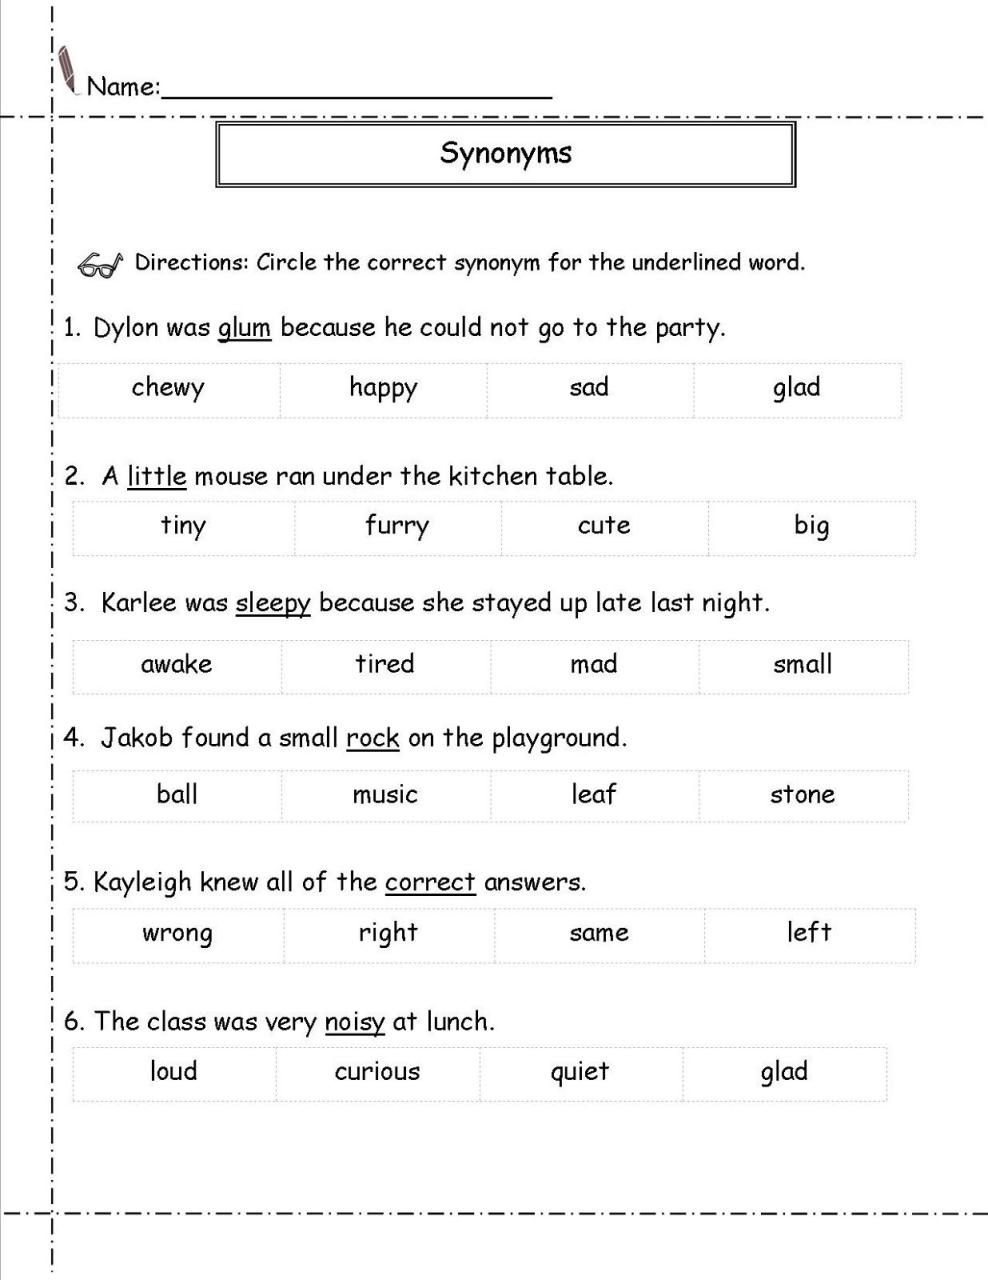 Free Synonyms Worksheet For Grade 3